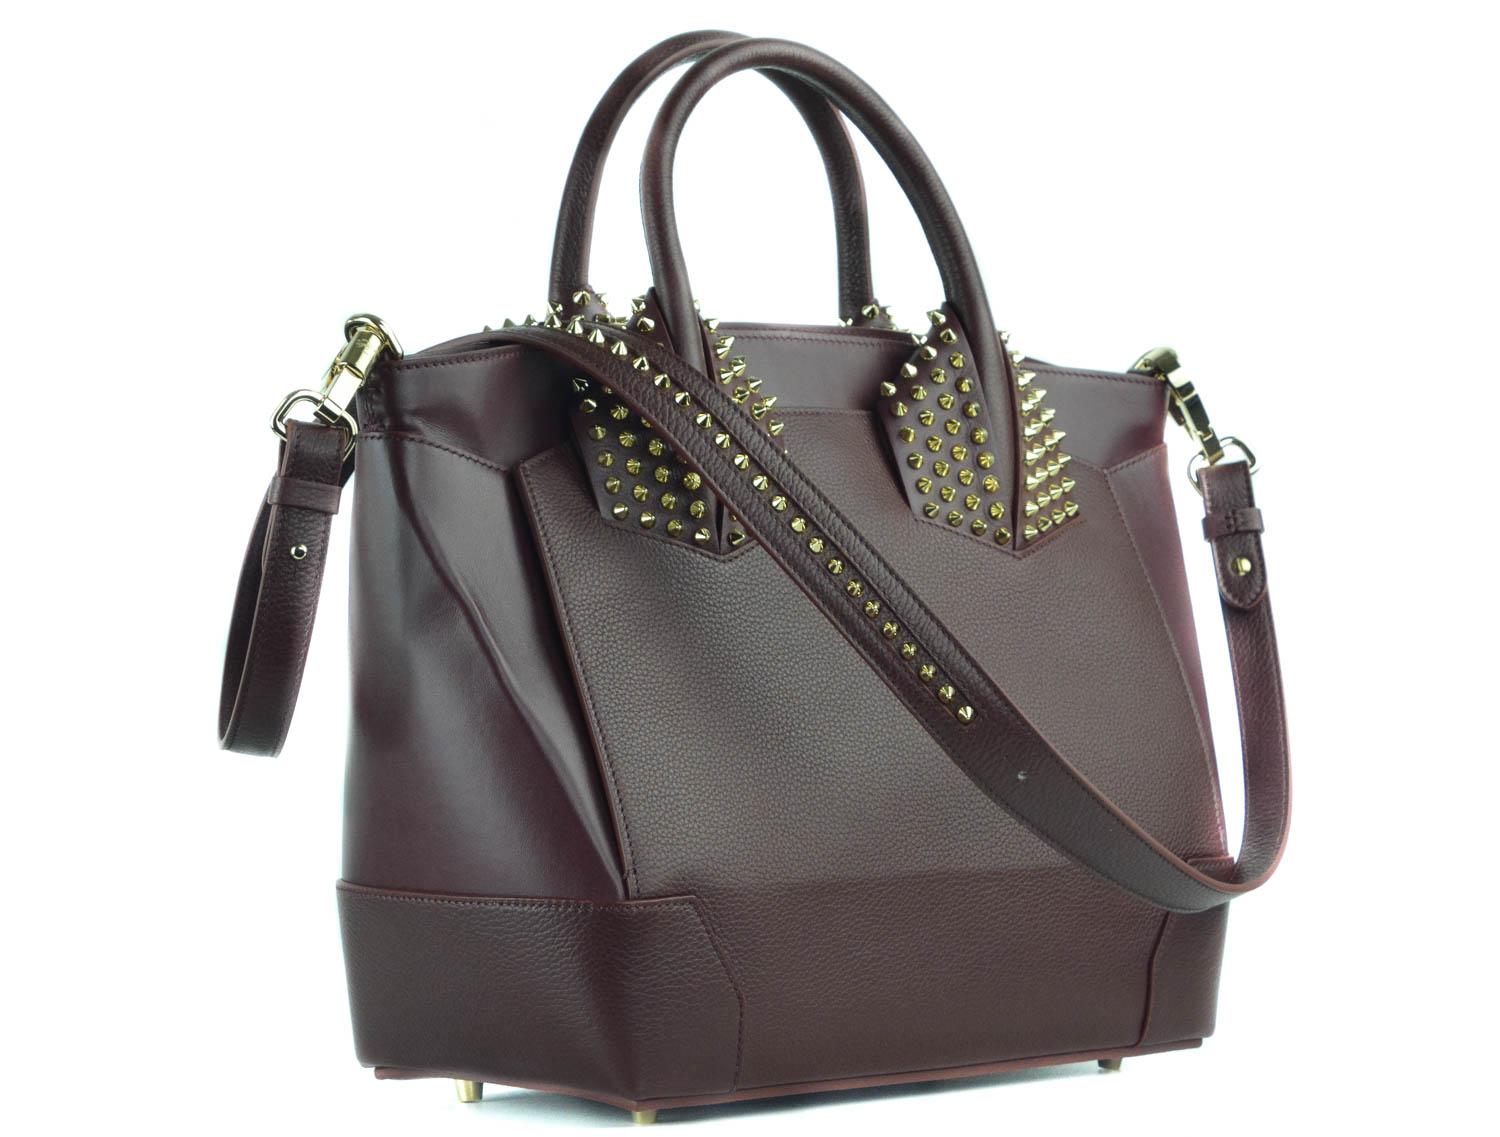 Sport one of Louboutin's signature collectors with your Large Eloise Handbag. This bag features a top zip closure, spike studded handle base, and luxurious grained calfskin leather composition. This bag can be taken into the office or out on the